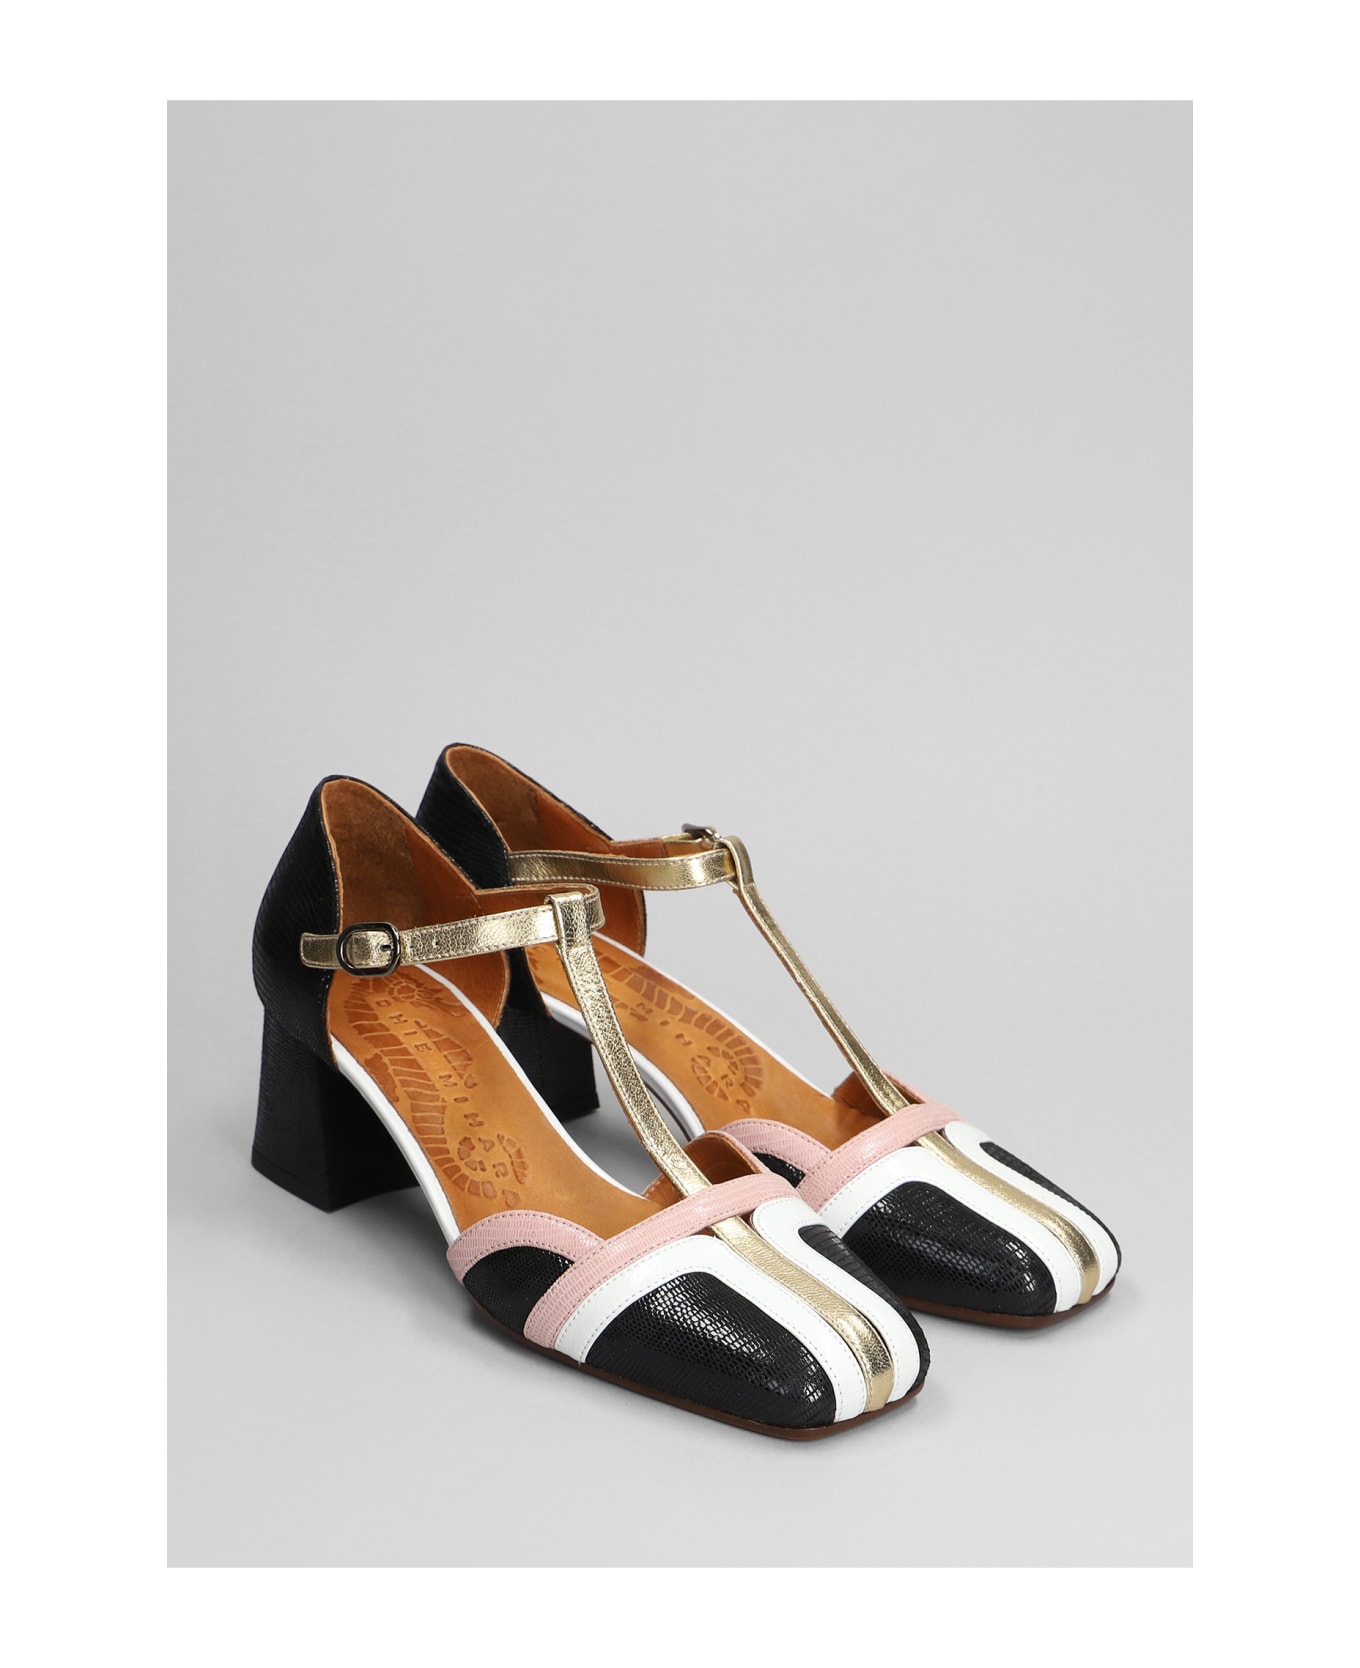 Chie Mihara Volai 44 Pumps In Black Leather - black